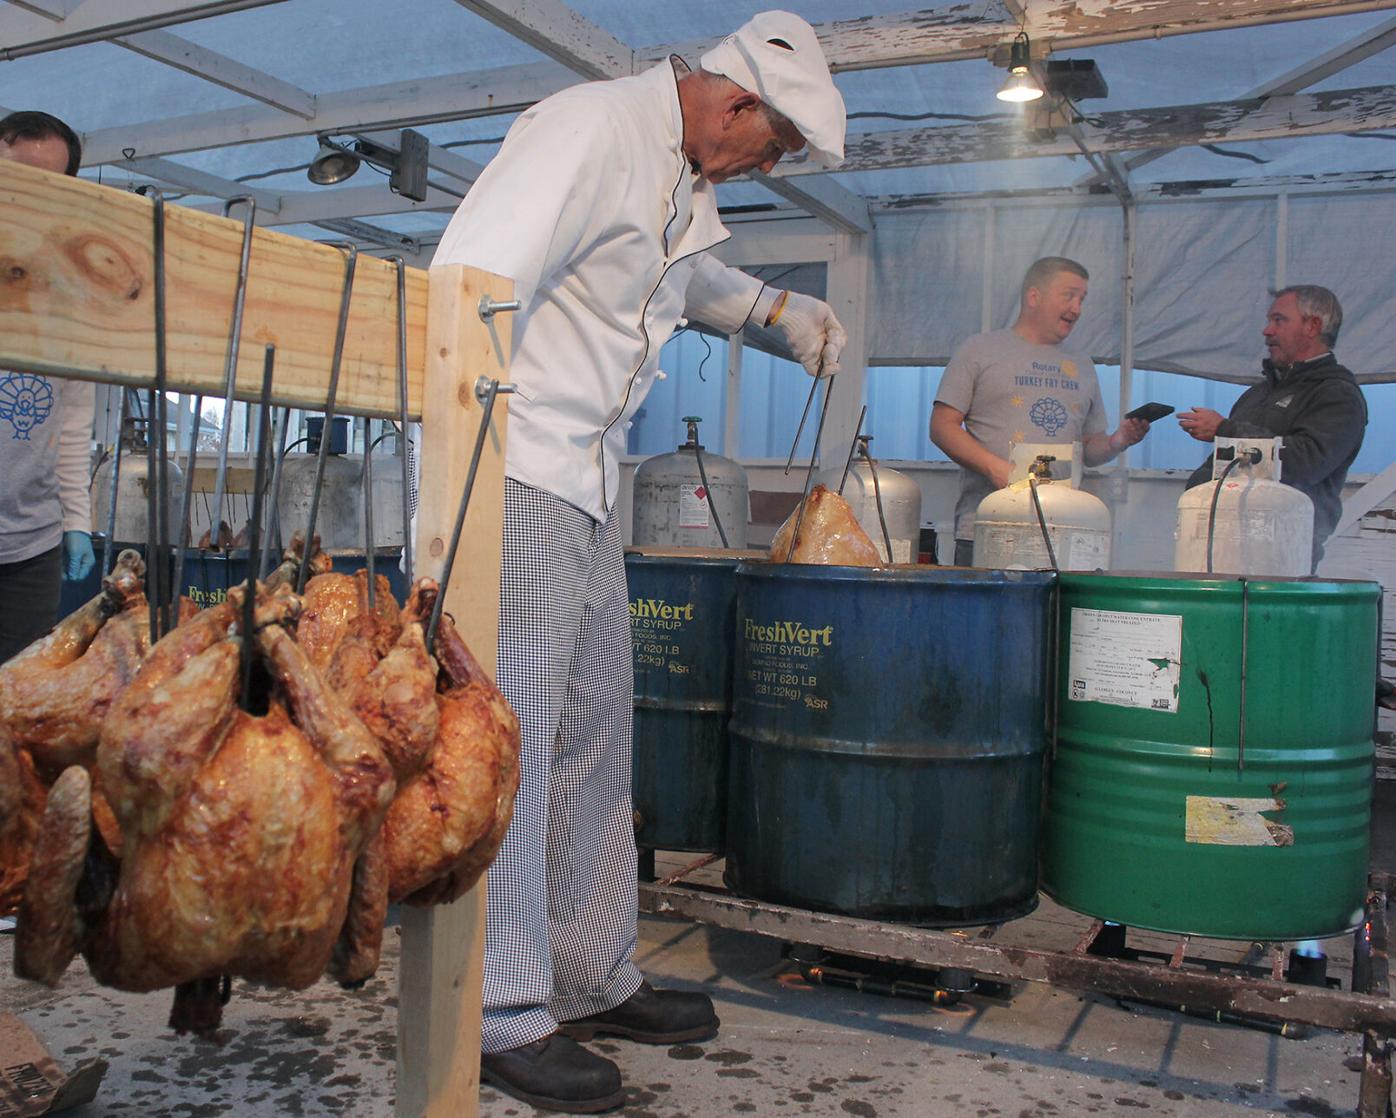 Marty Walker, a member of the Rotary Club of Columbia, checks the temperature of the turkeys as they fry in barrels of oil